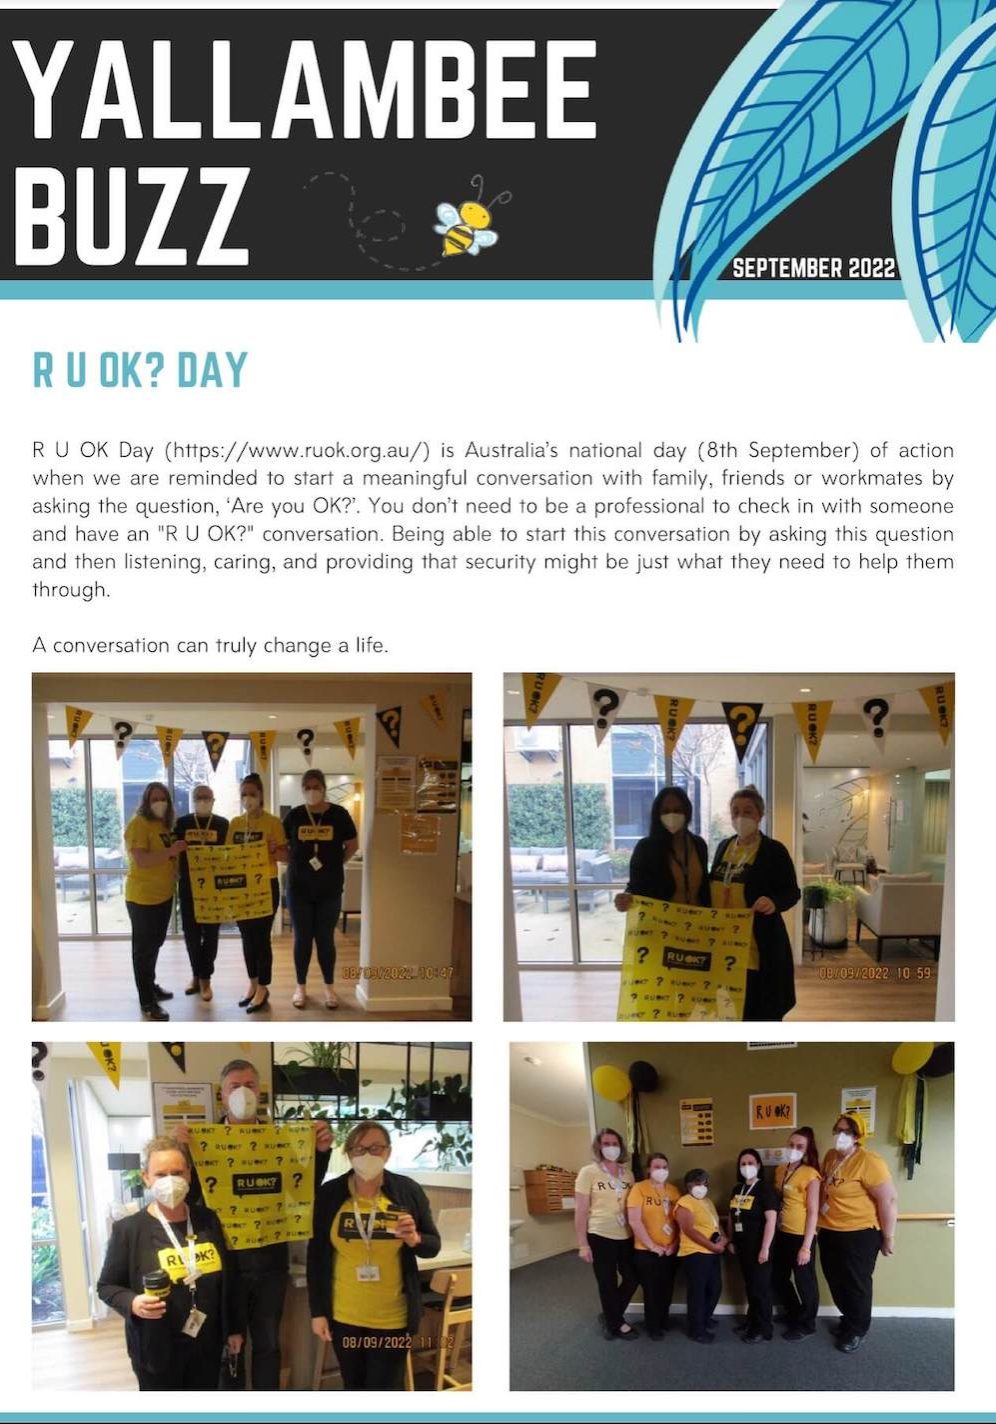 Screenshot of the cover of the Sept 2022 Yallambee Buzz newsletter.